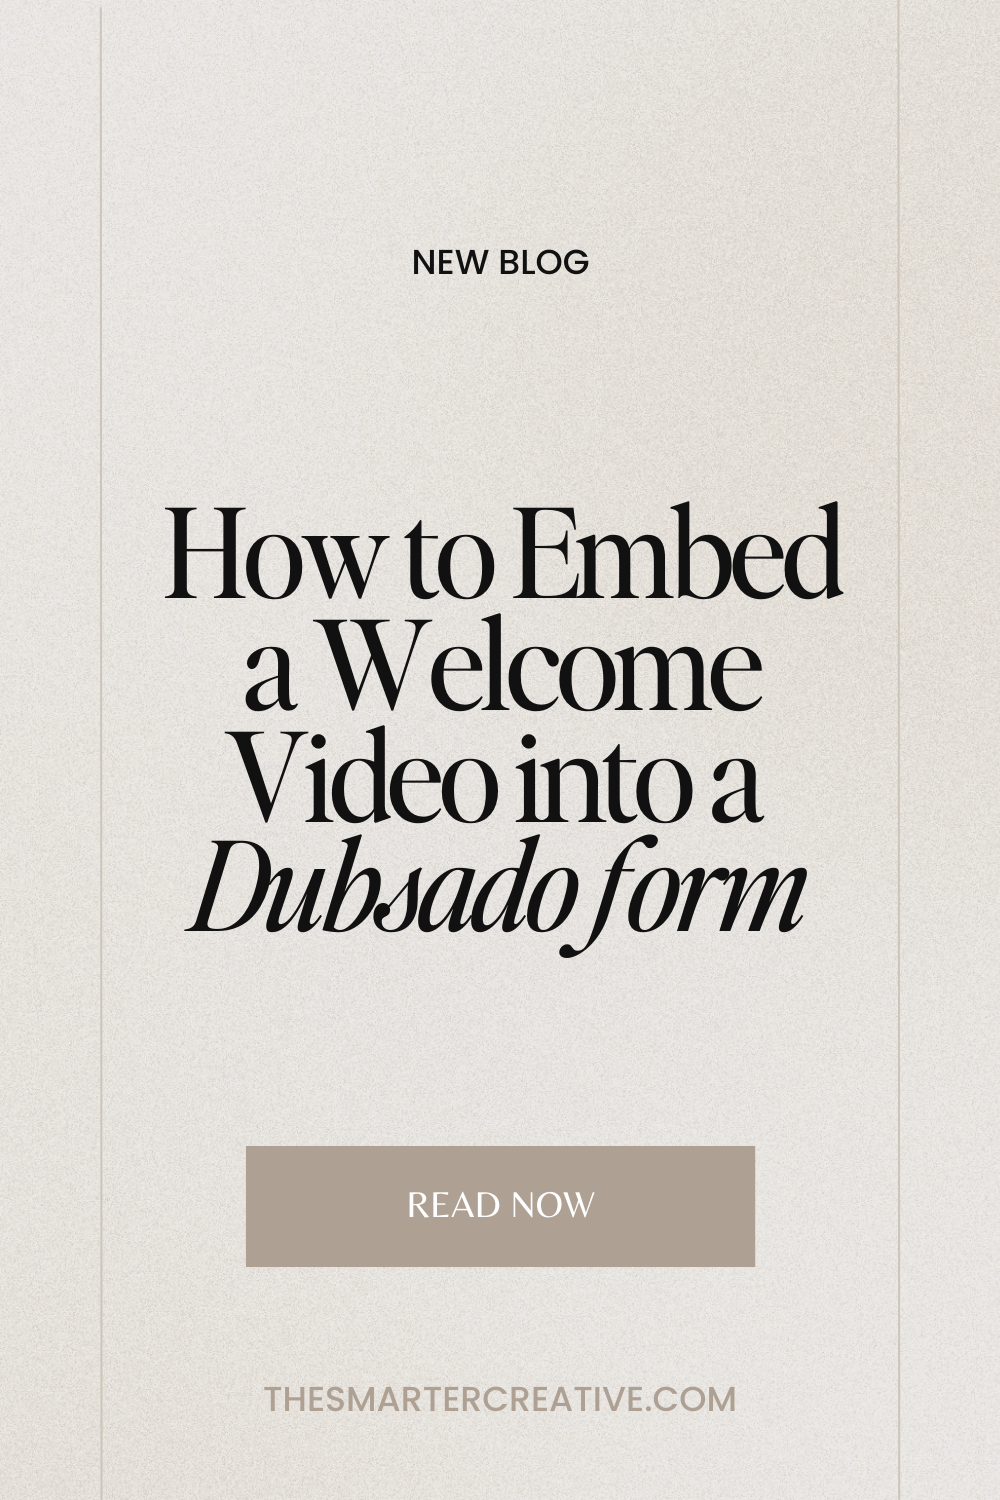 How to Embed a Welcome Video into a Dubsado Form